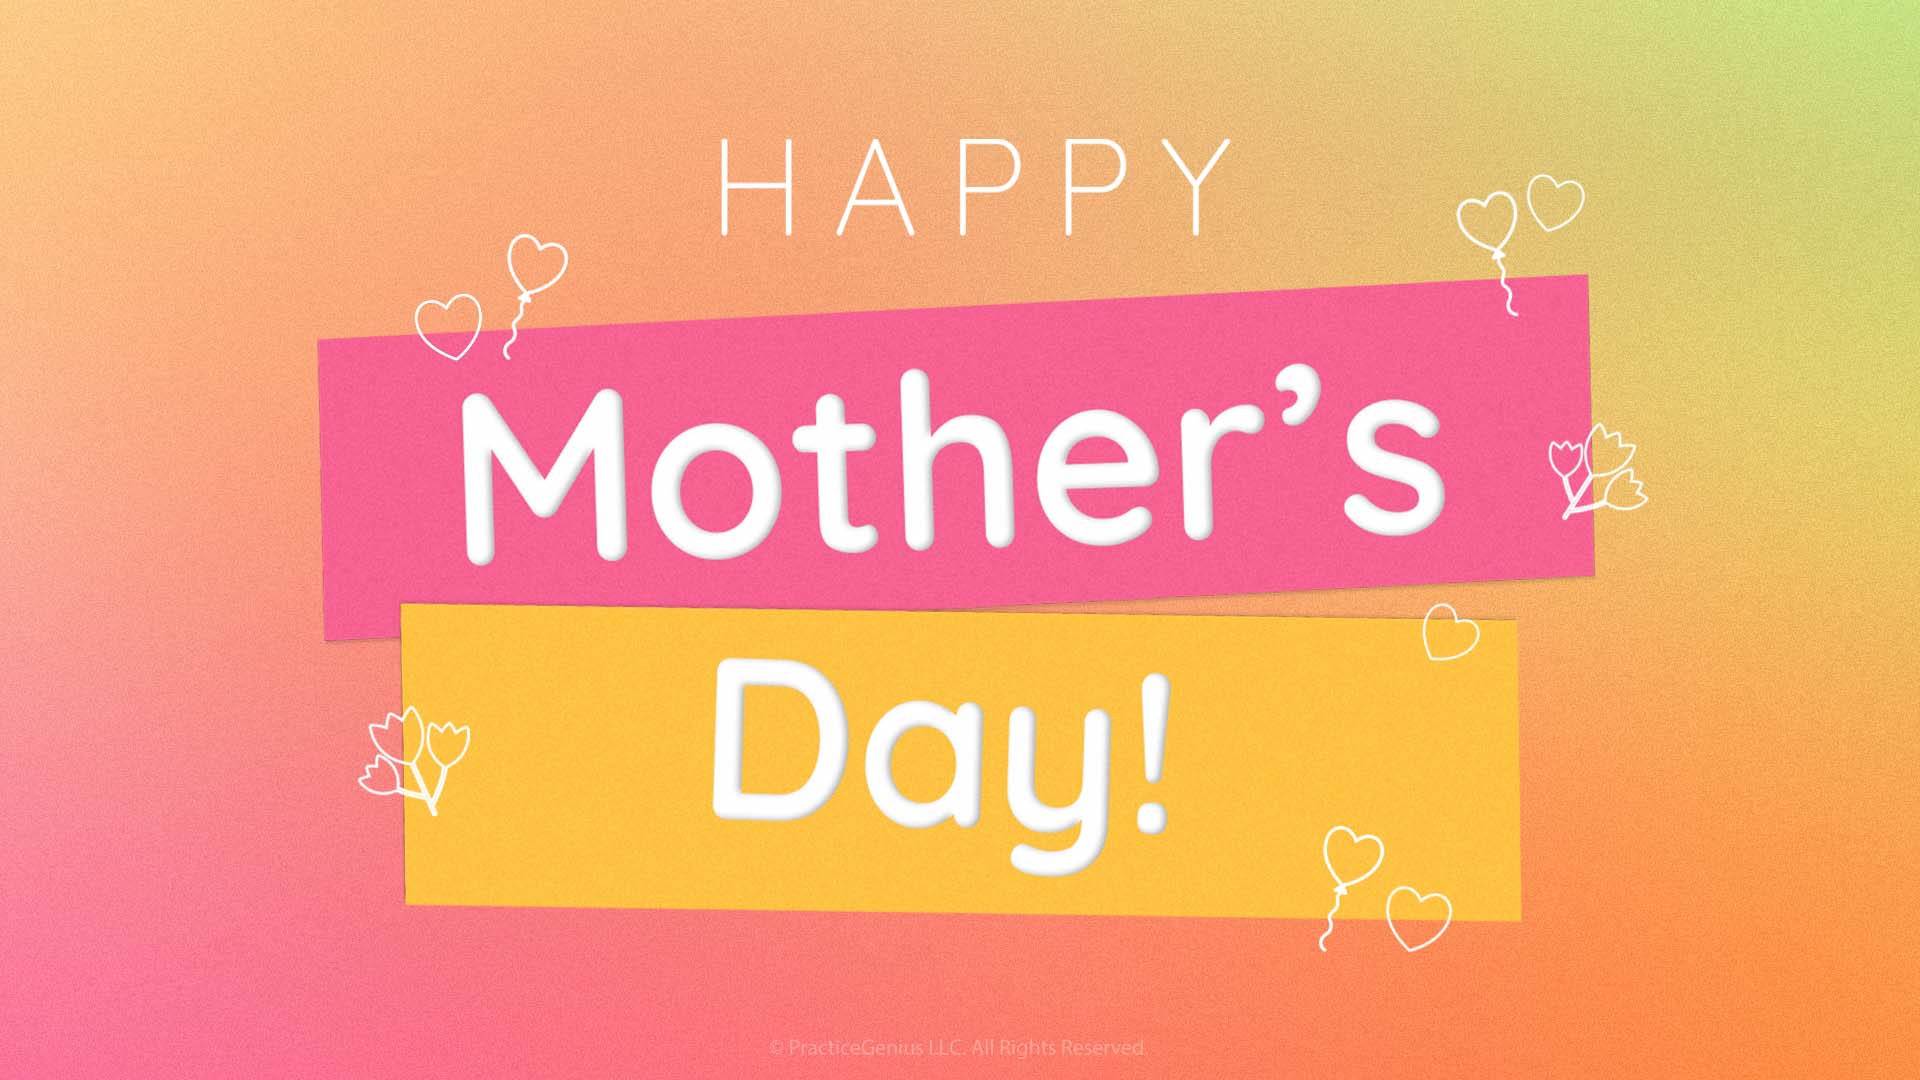 Mother_s_Day_promo1.jpg